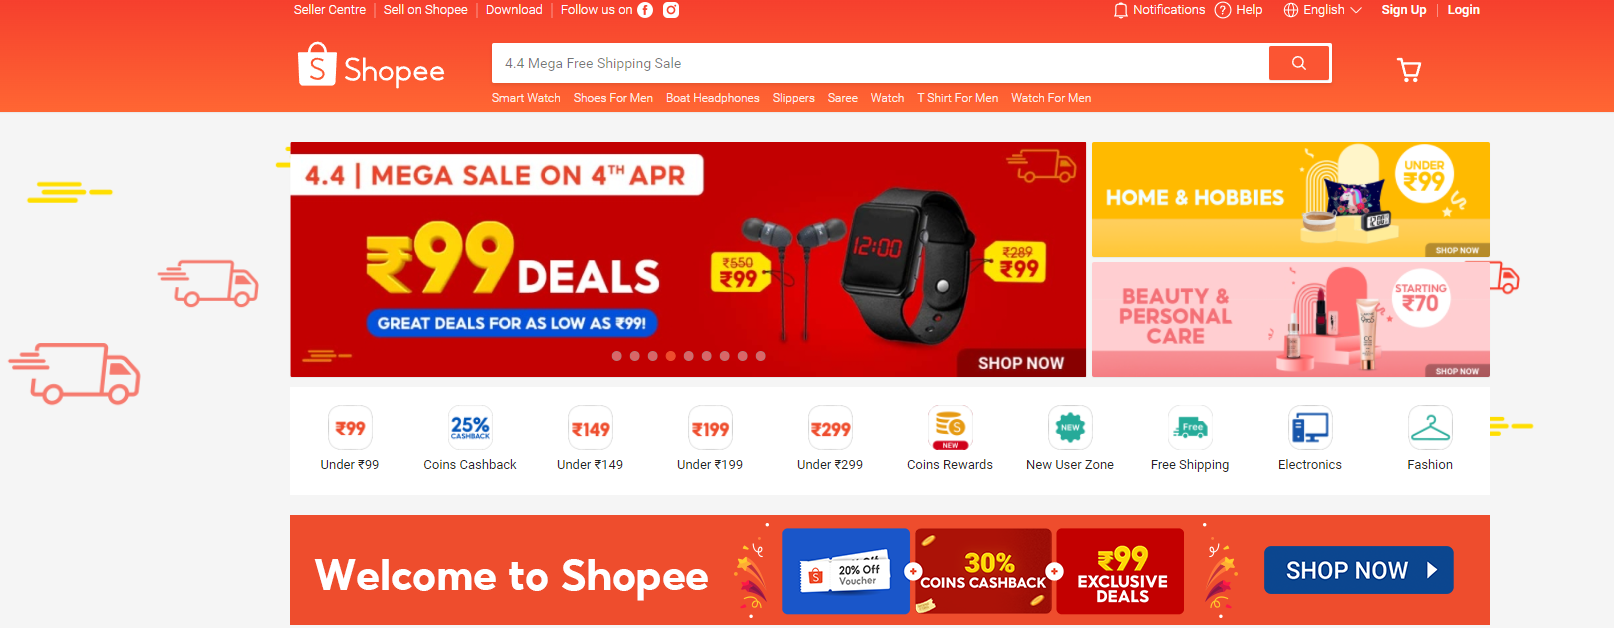 Sea's Shopee to launch in Chile and Colombia